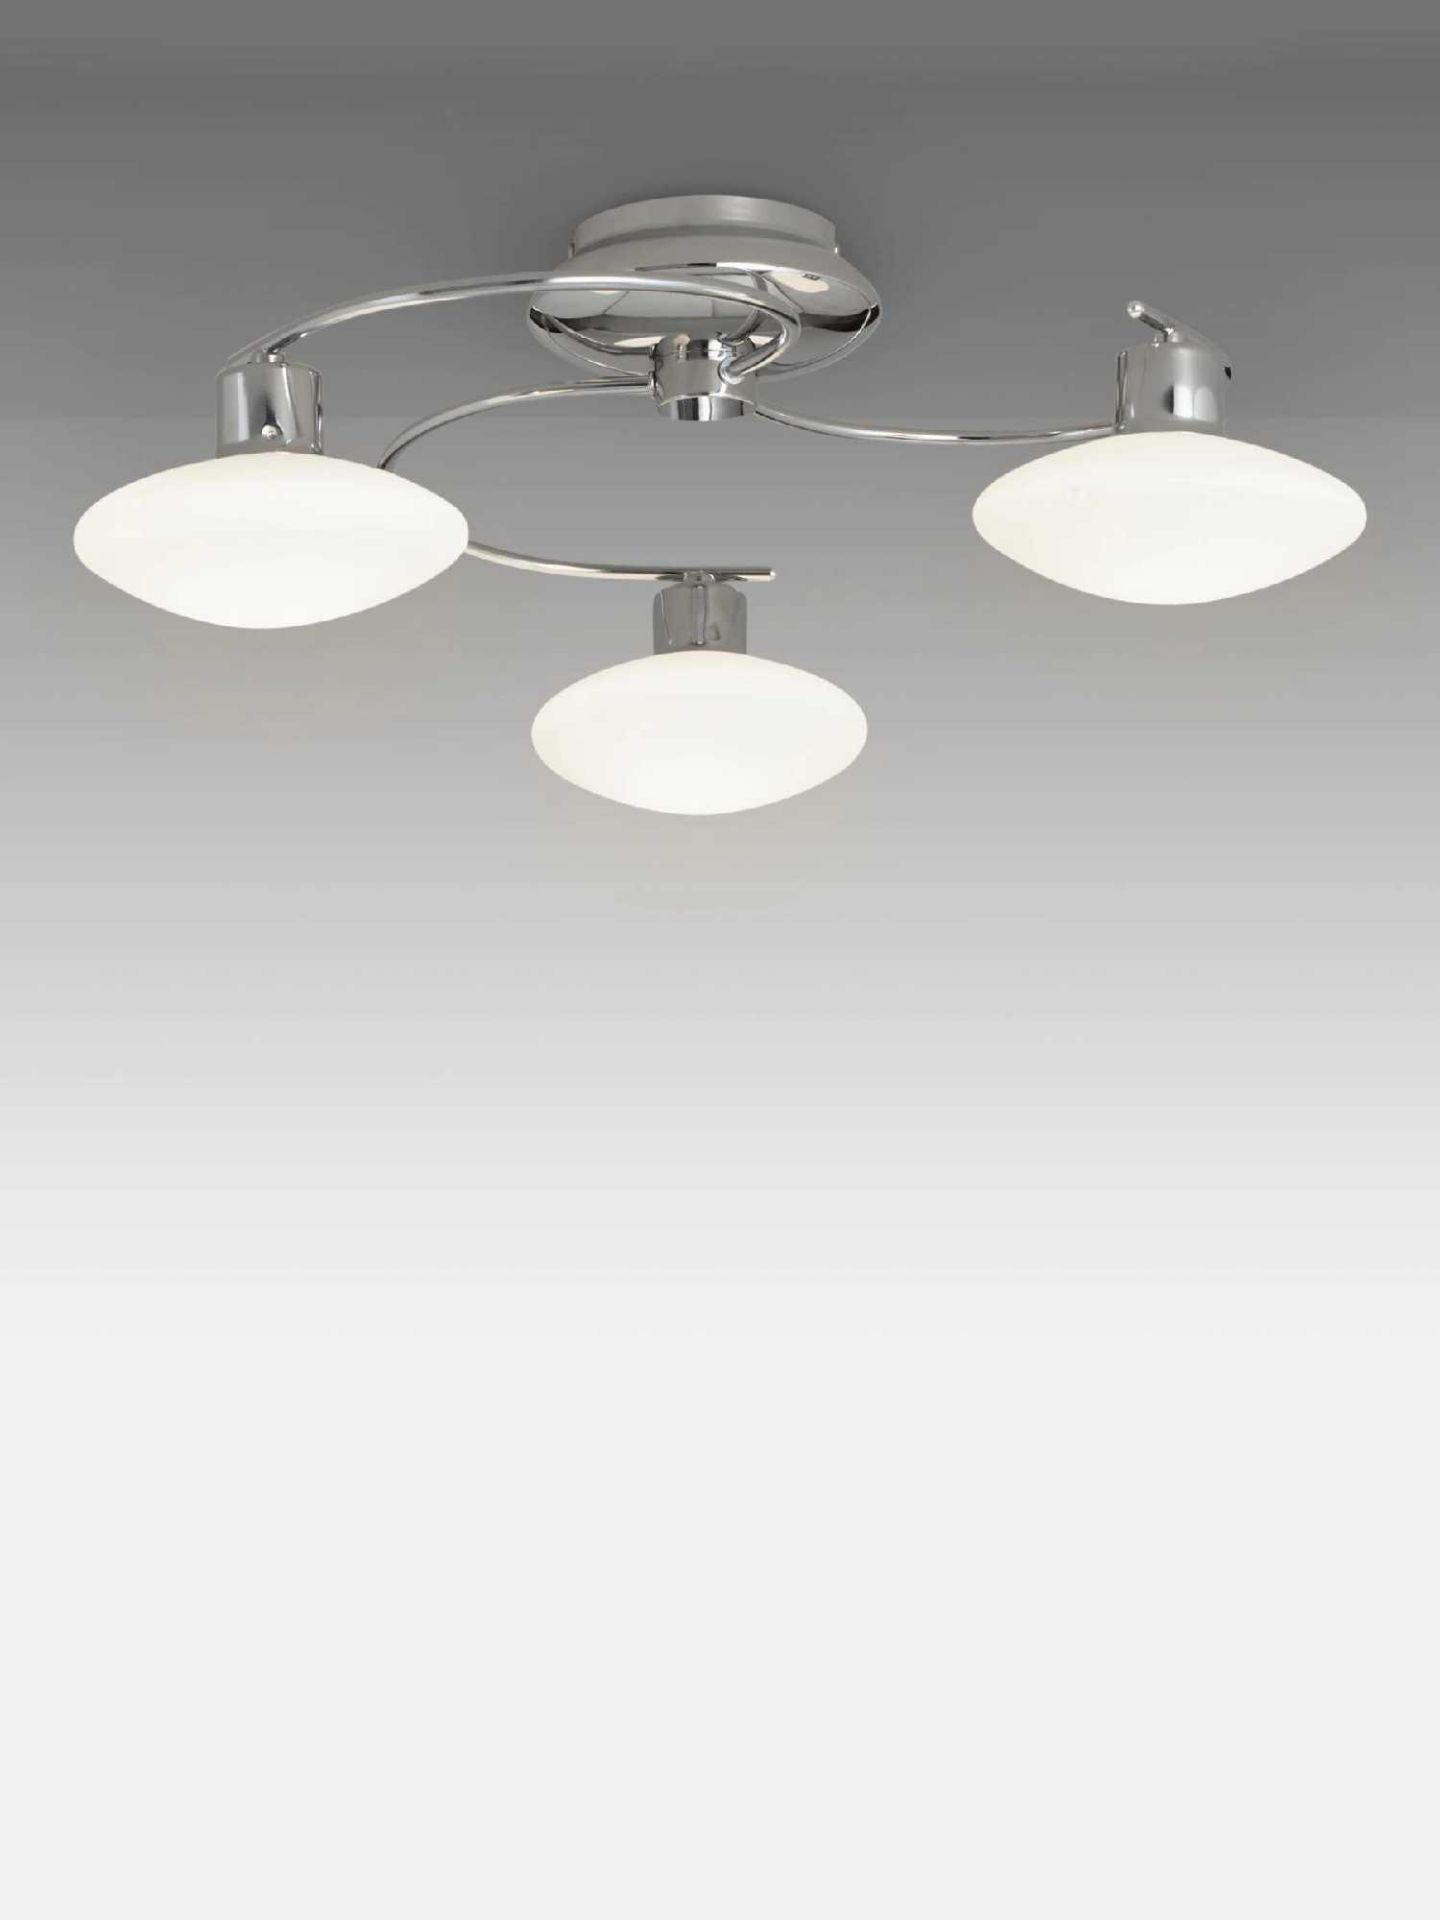 Rrp £125 Boxed John Lewis And Partners Tameo 3-Light Chrome Finish Ceiling Light Pendant With Opal G